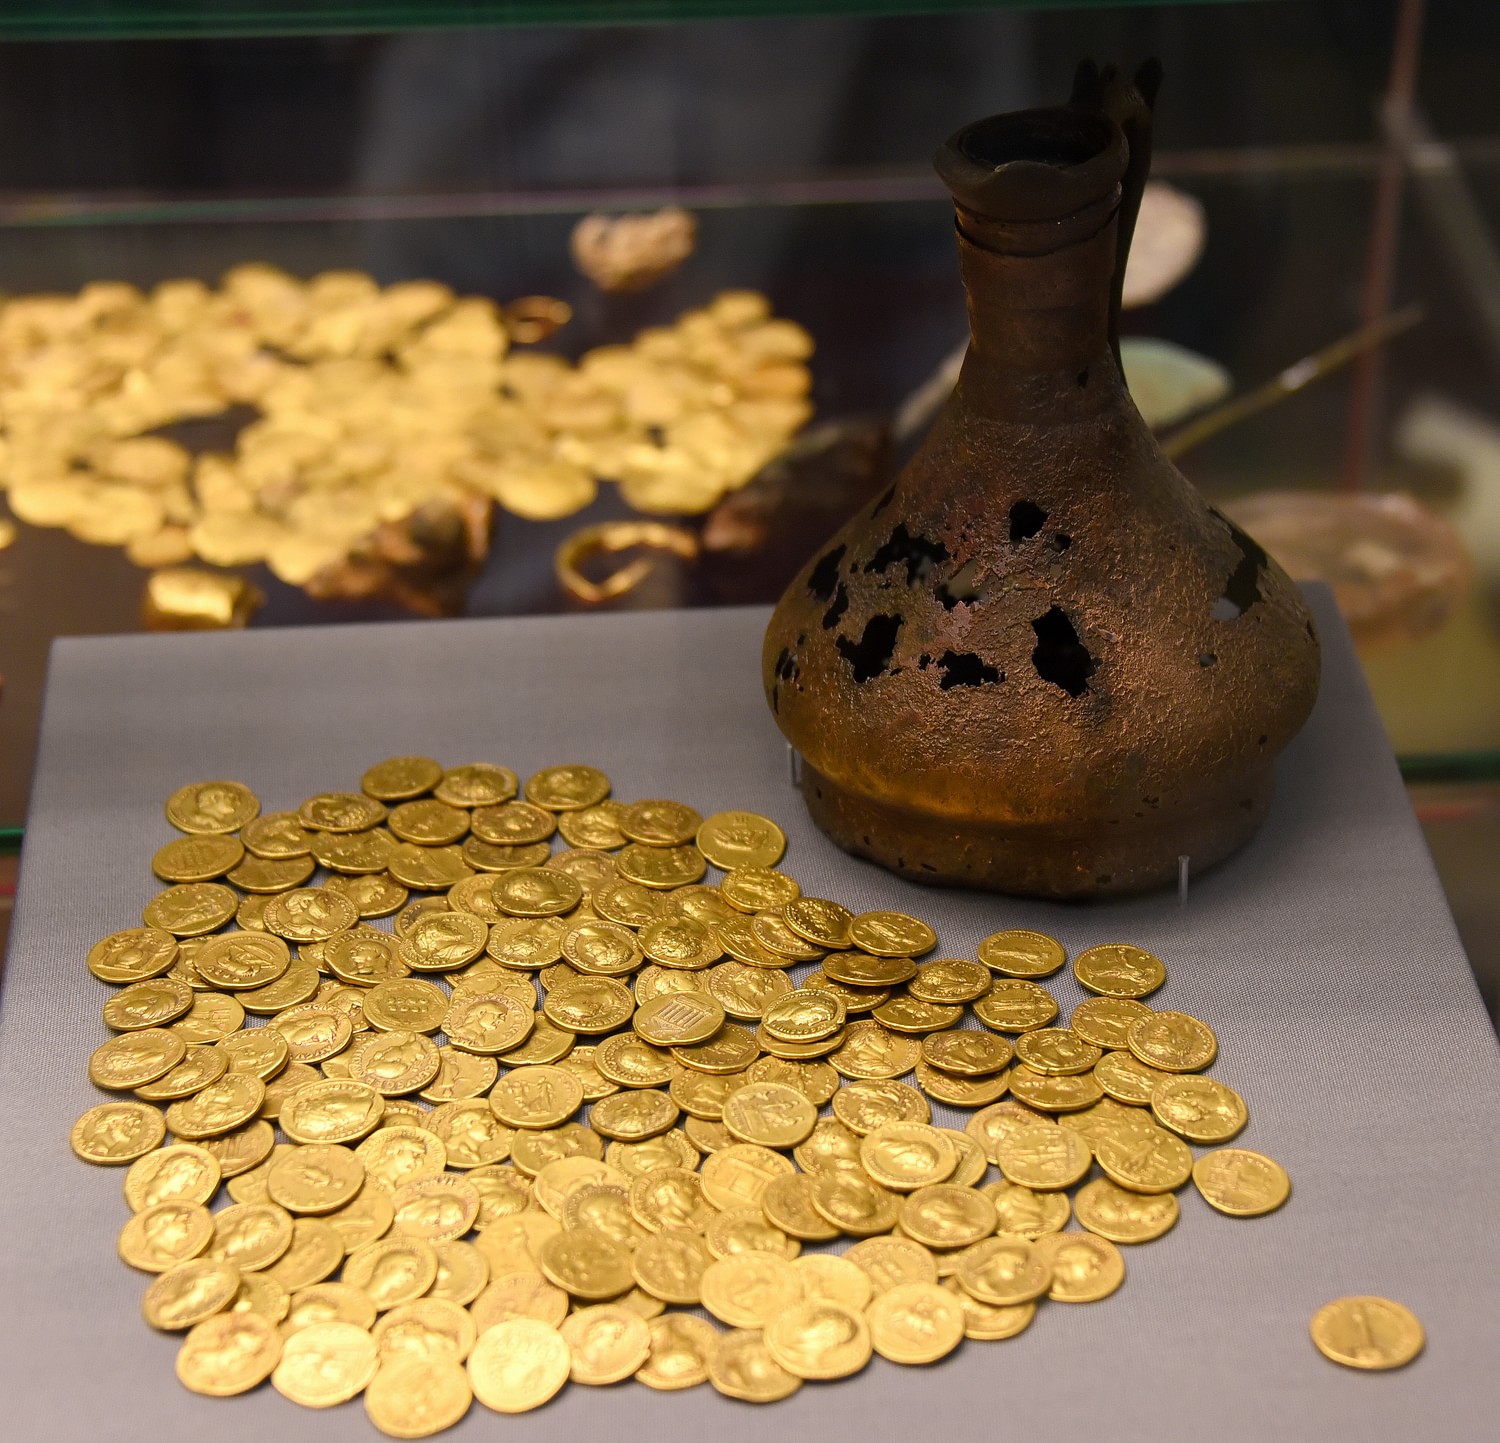 Exotic Goods and Foreign Luxuries: The Ancient Roman Marketplace